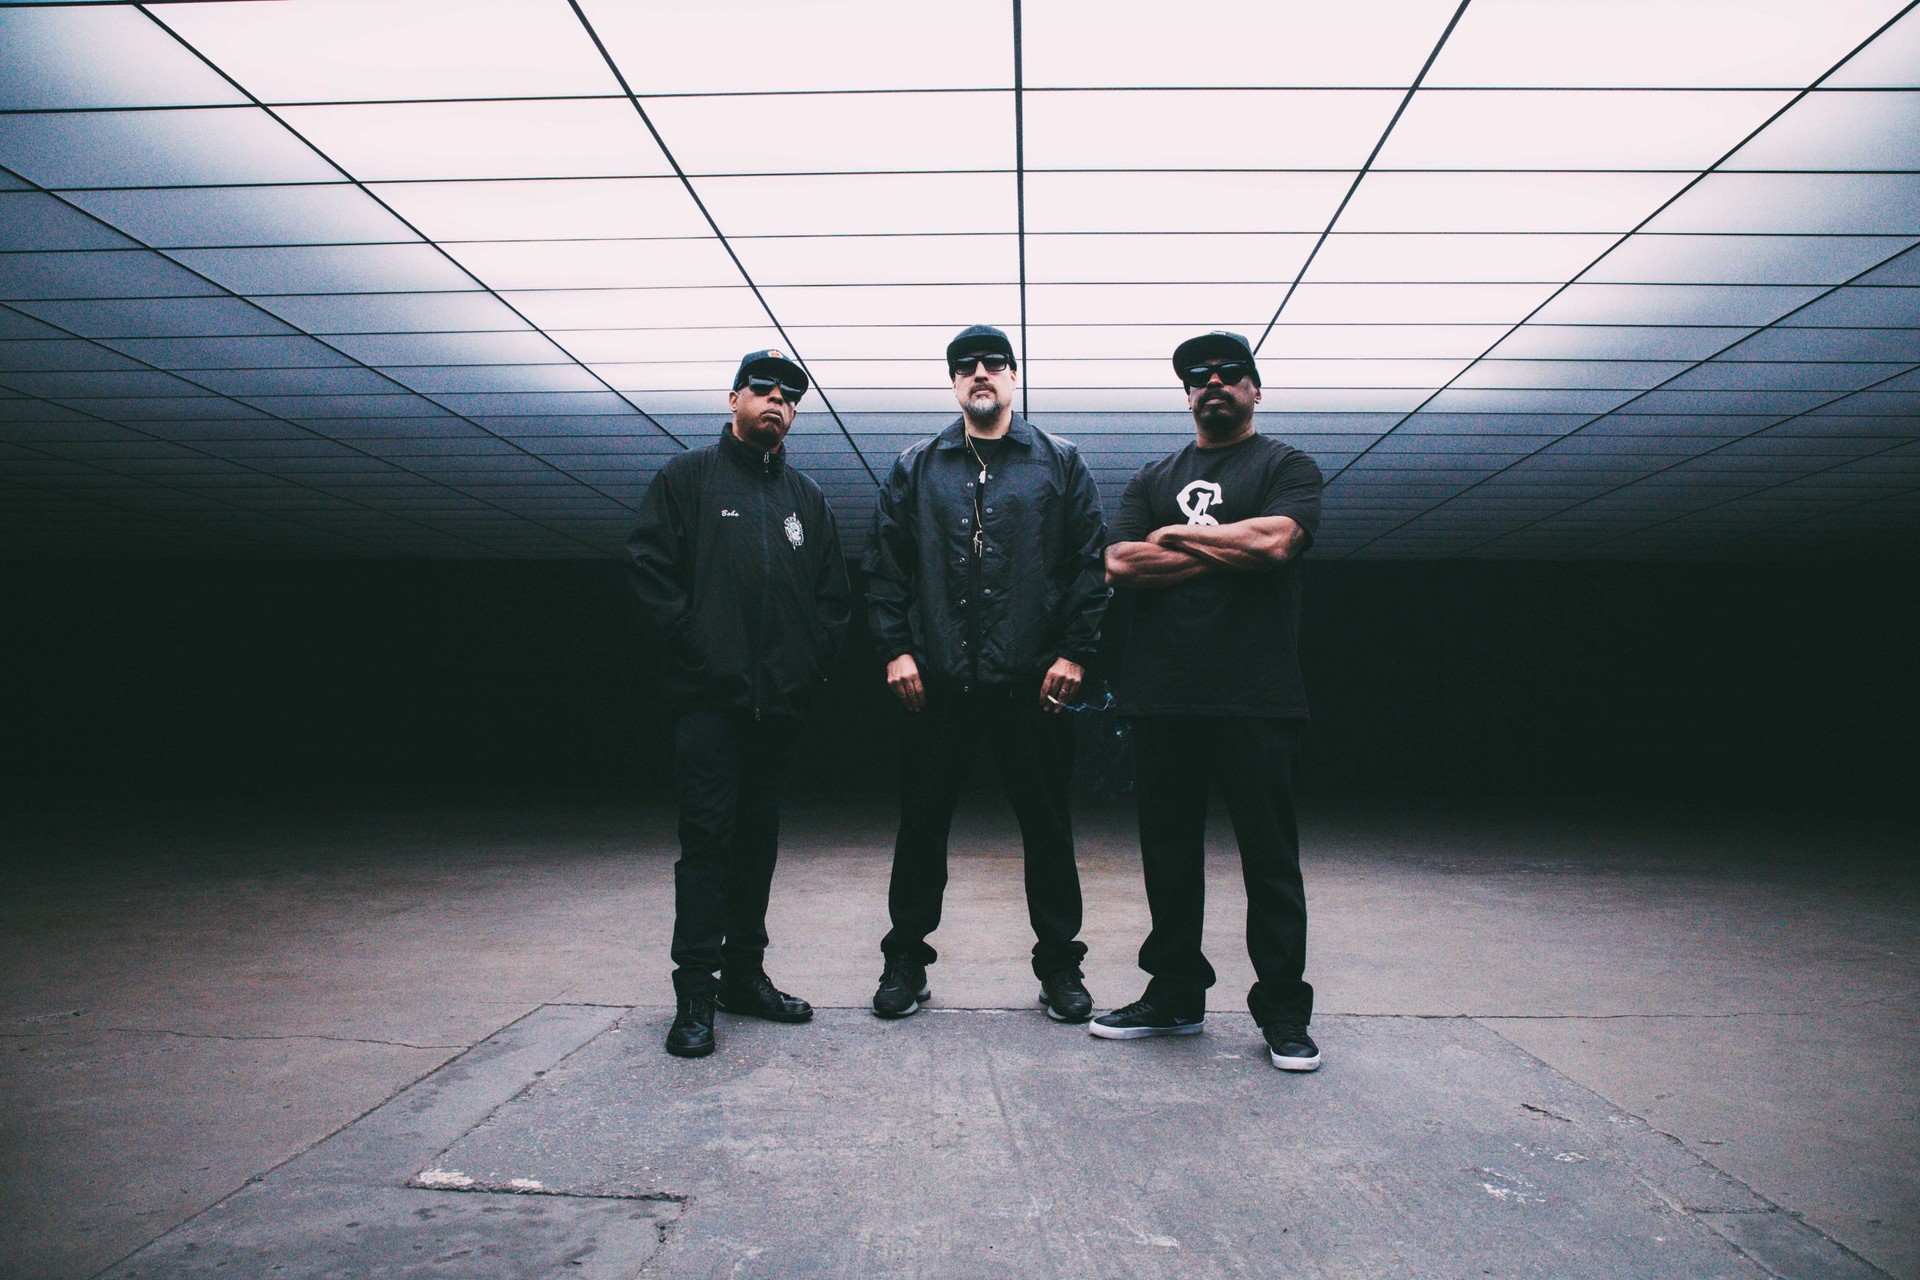 Cypress Hill is ‘Certified’ in the Metaverse